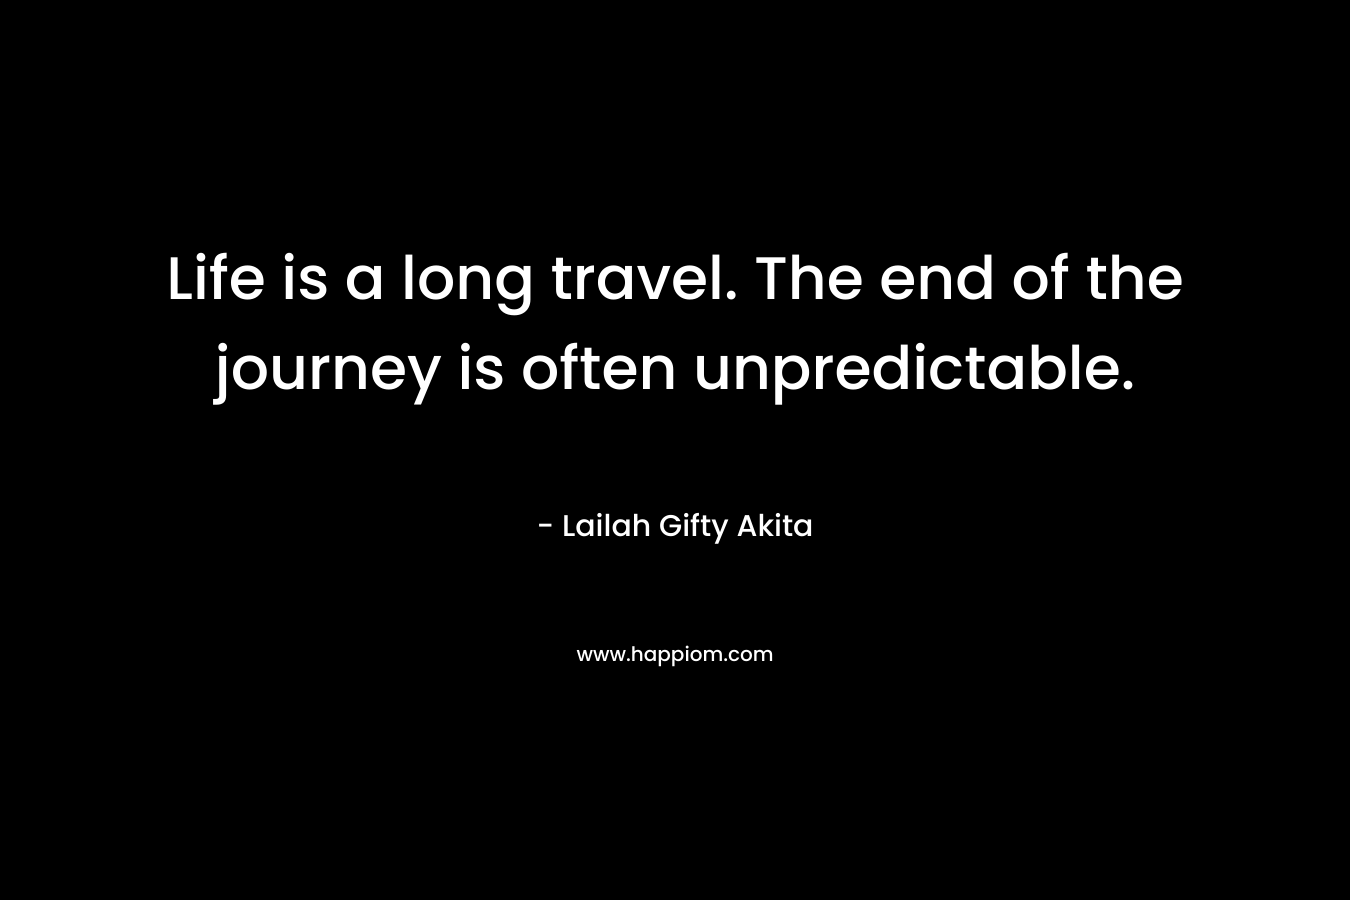 Life is a long travel. The end of the journey is often unpredictable.